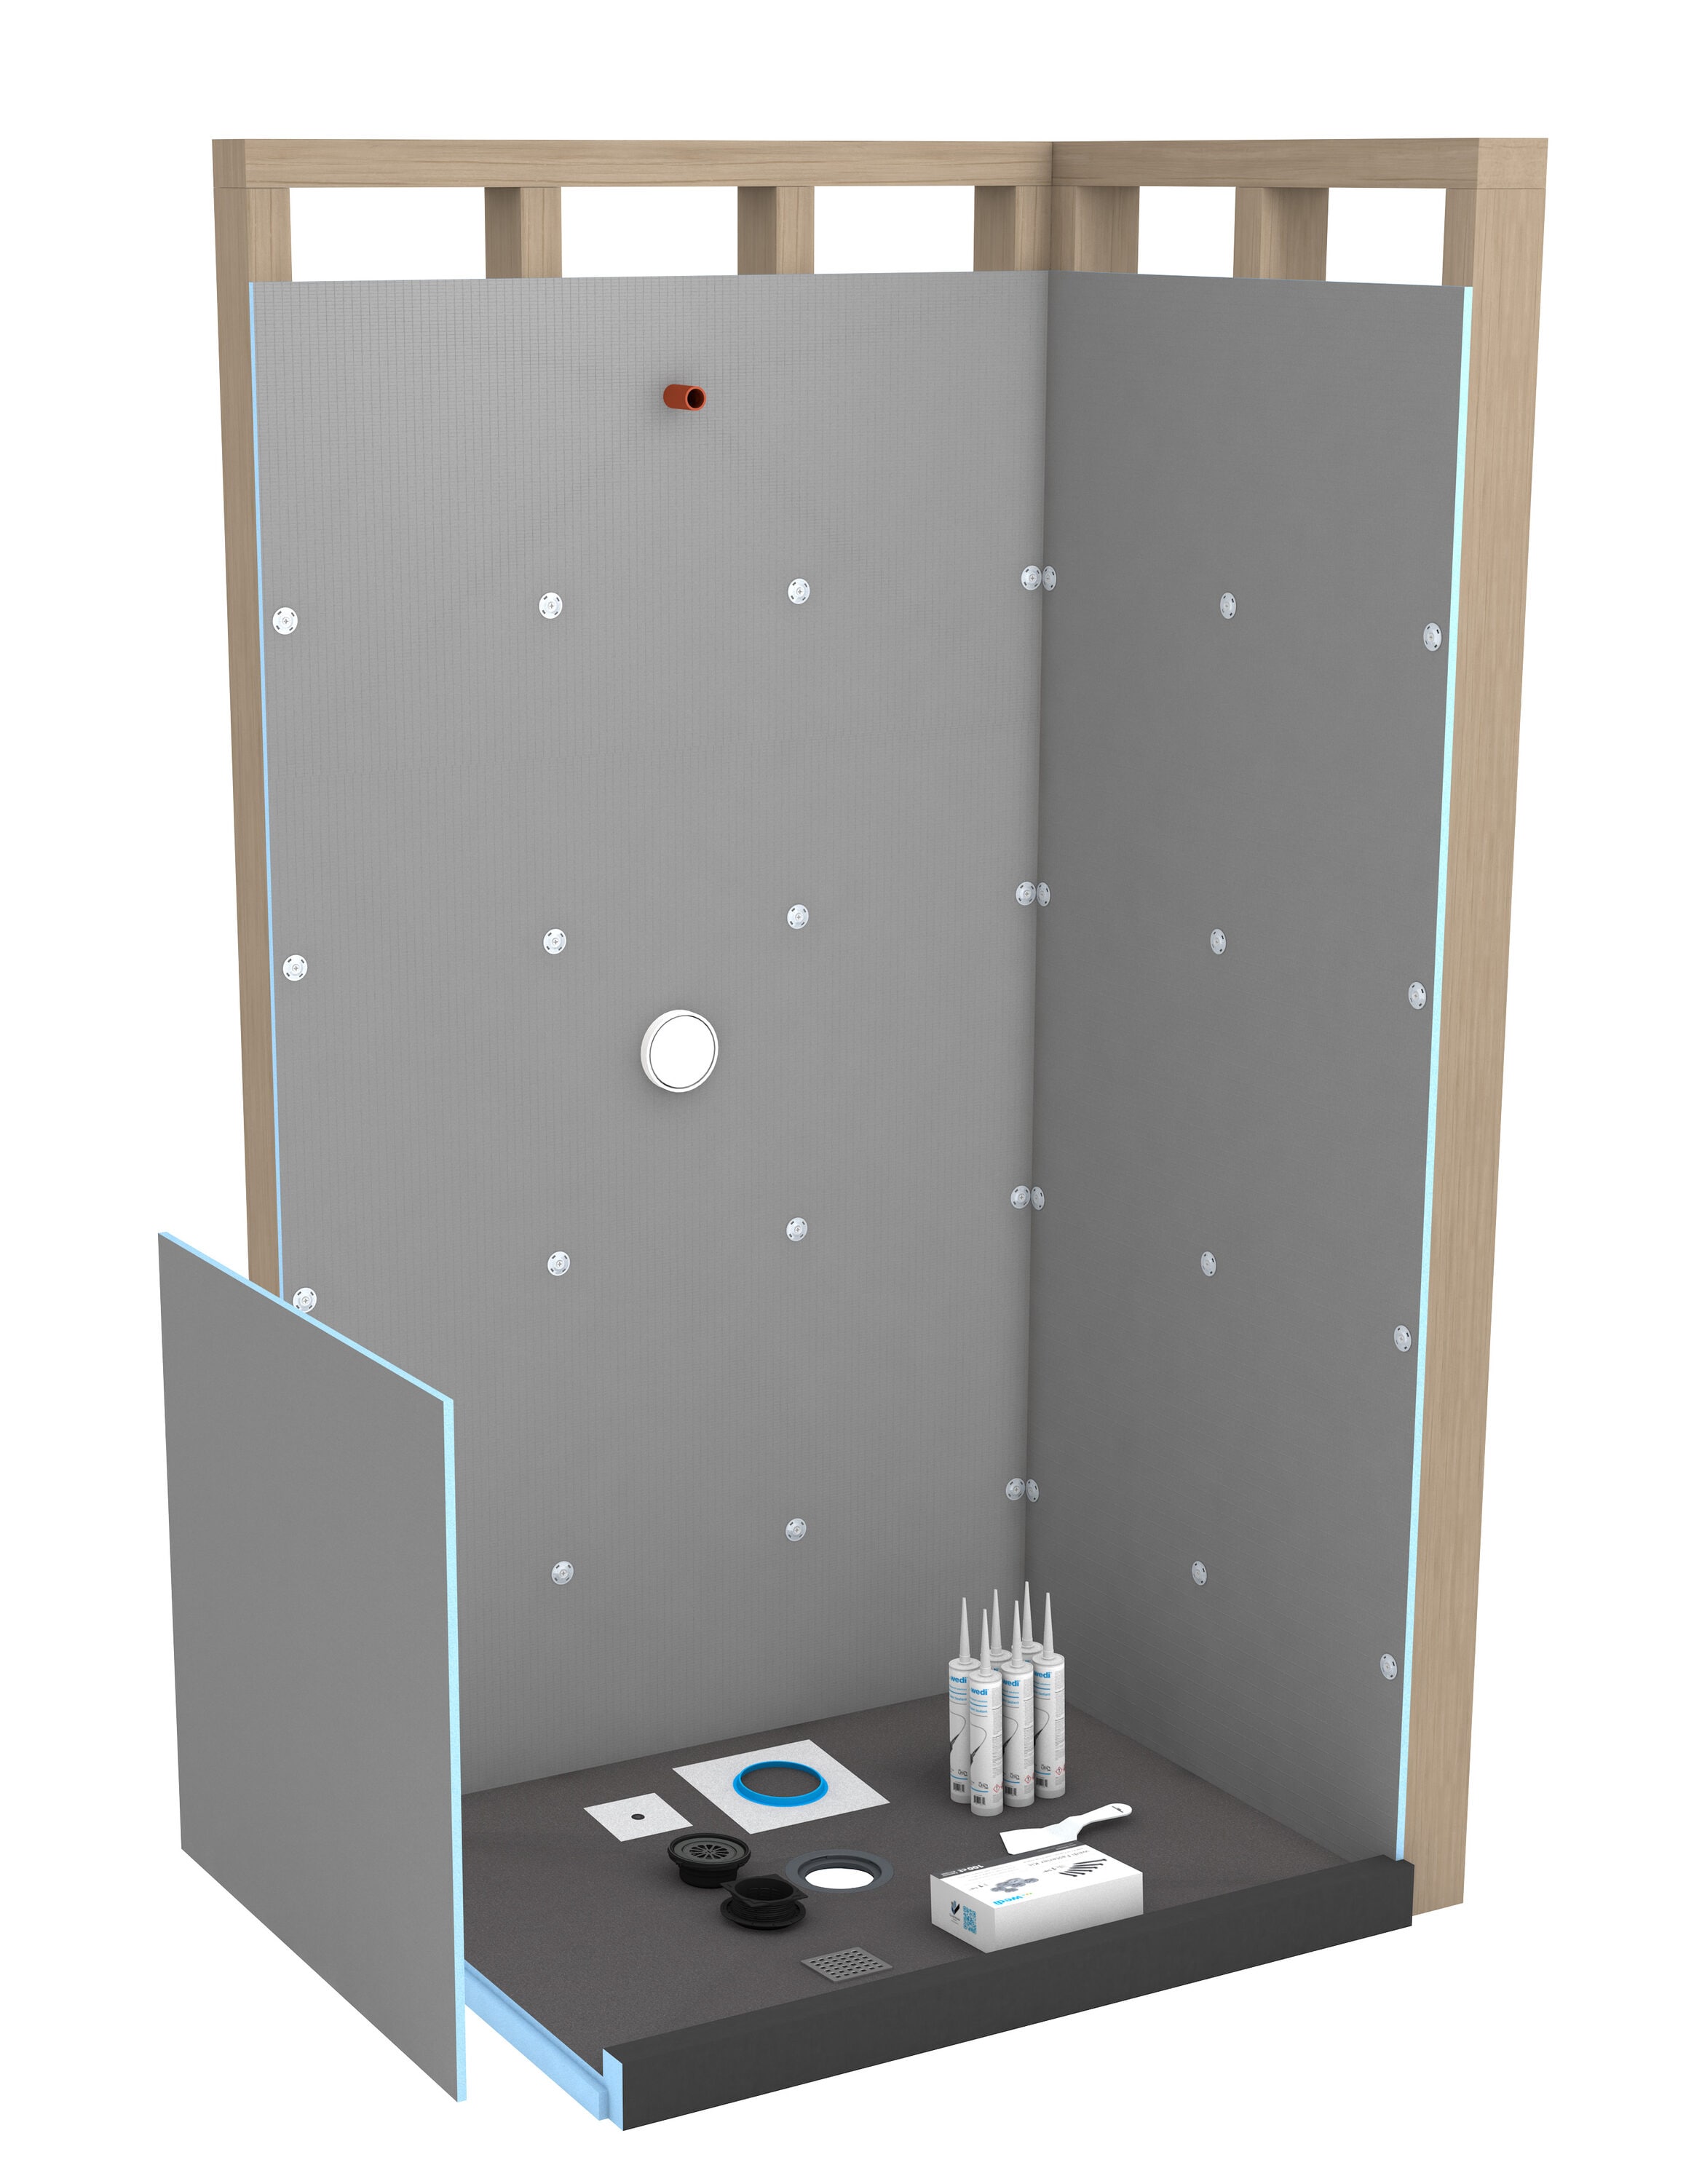 wedi Fundo Shower Kit - Primo 36-in x48-in in the Shower Pan Parts  department at